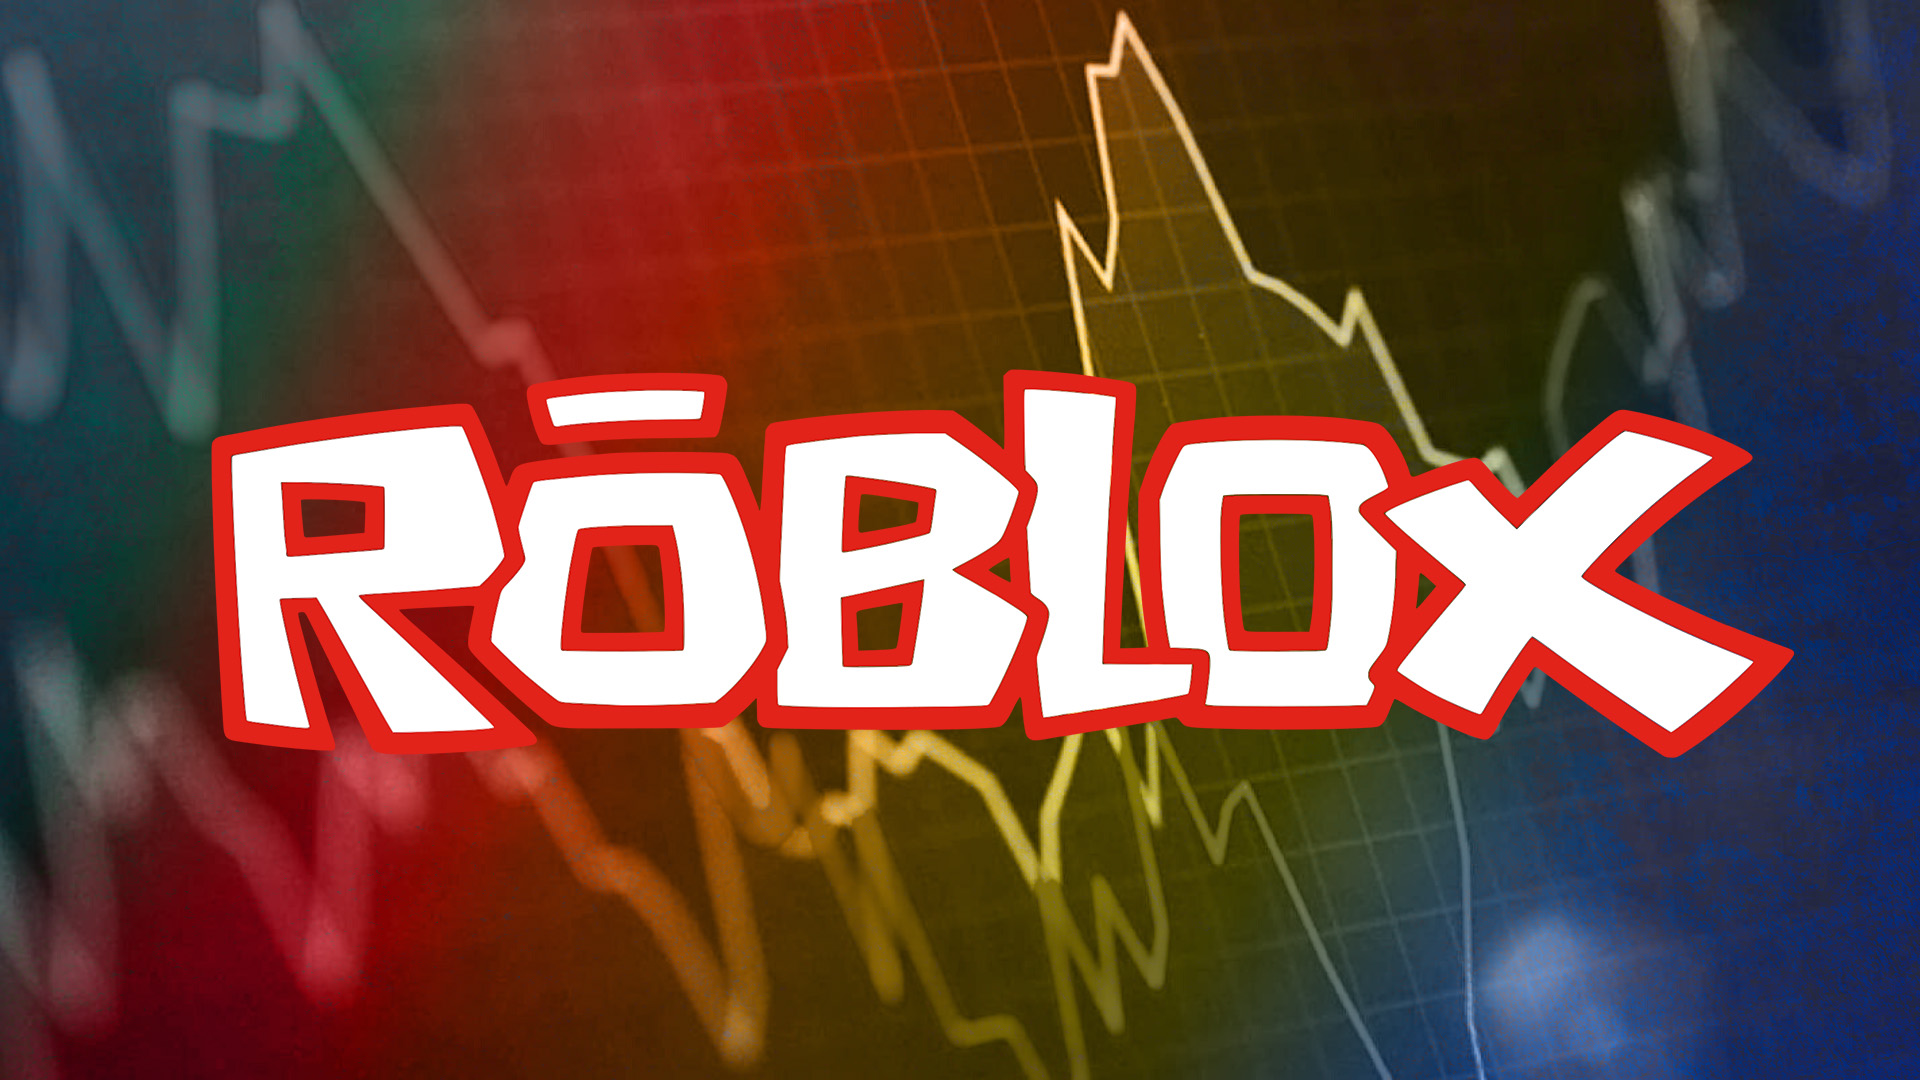 Roblox (NYSE:RBLX): Big-Time Bookings Growth Gets This Stock